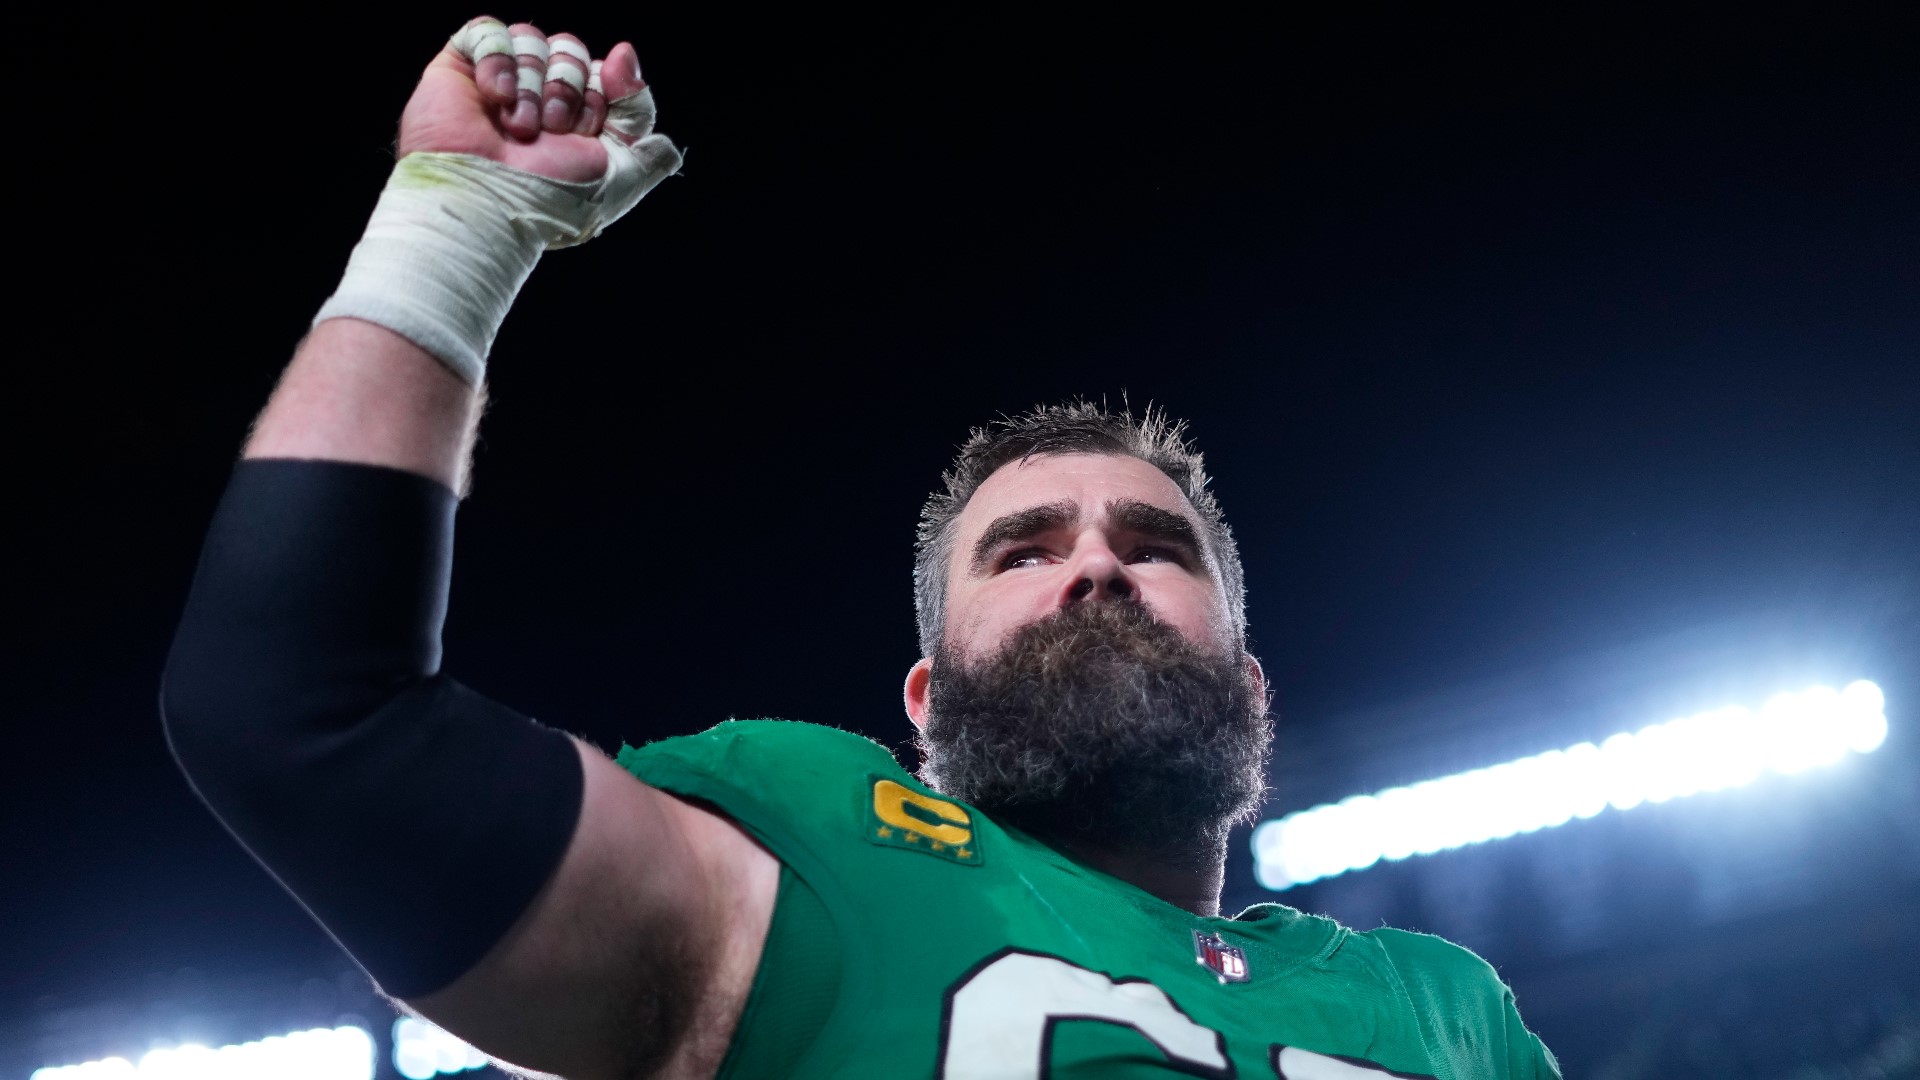 According to ESPN's Adam Schefter, Kelce became very emotional after the team's loss to the Buccaneers on Monday night when he told his teammates he was done.